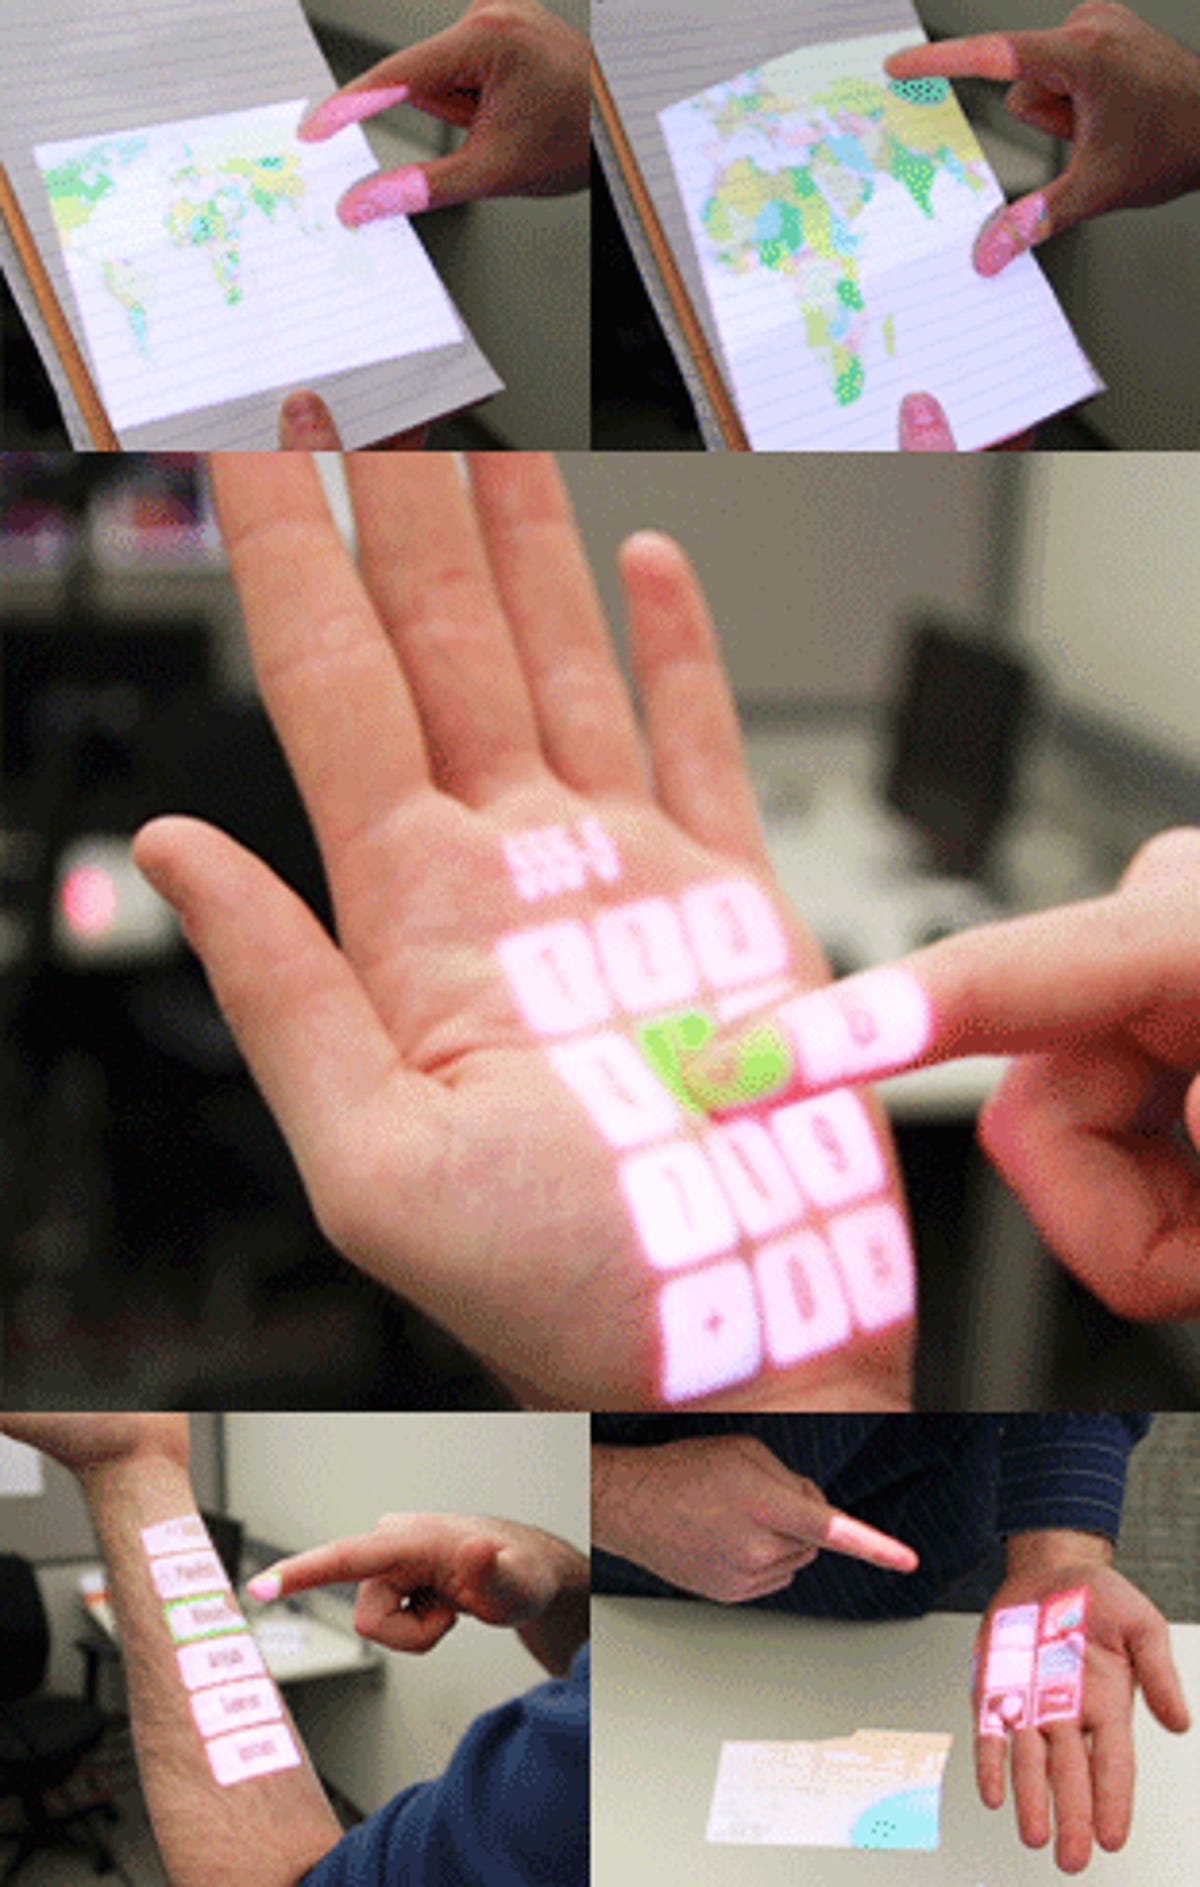 OmniTouch allows any surface to be used as a touch screen.